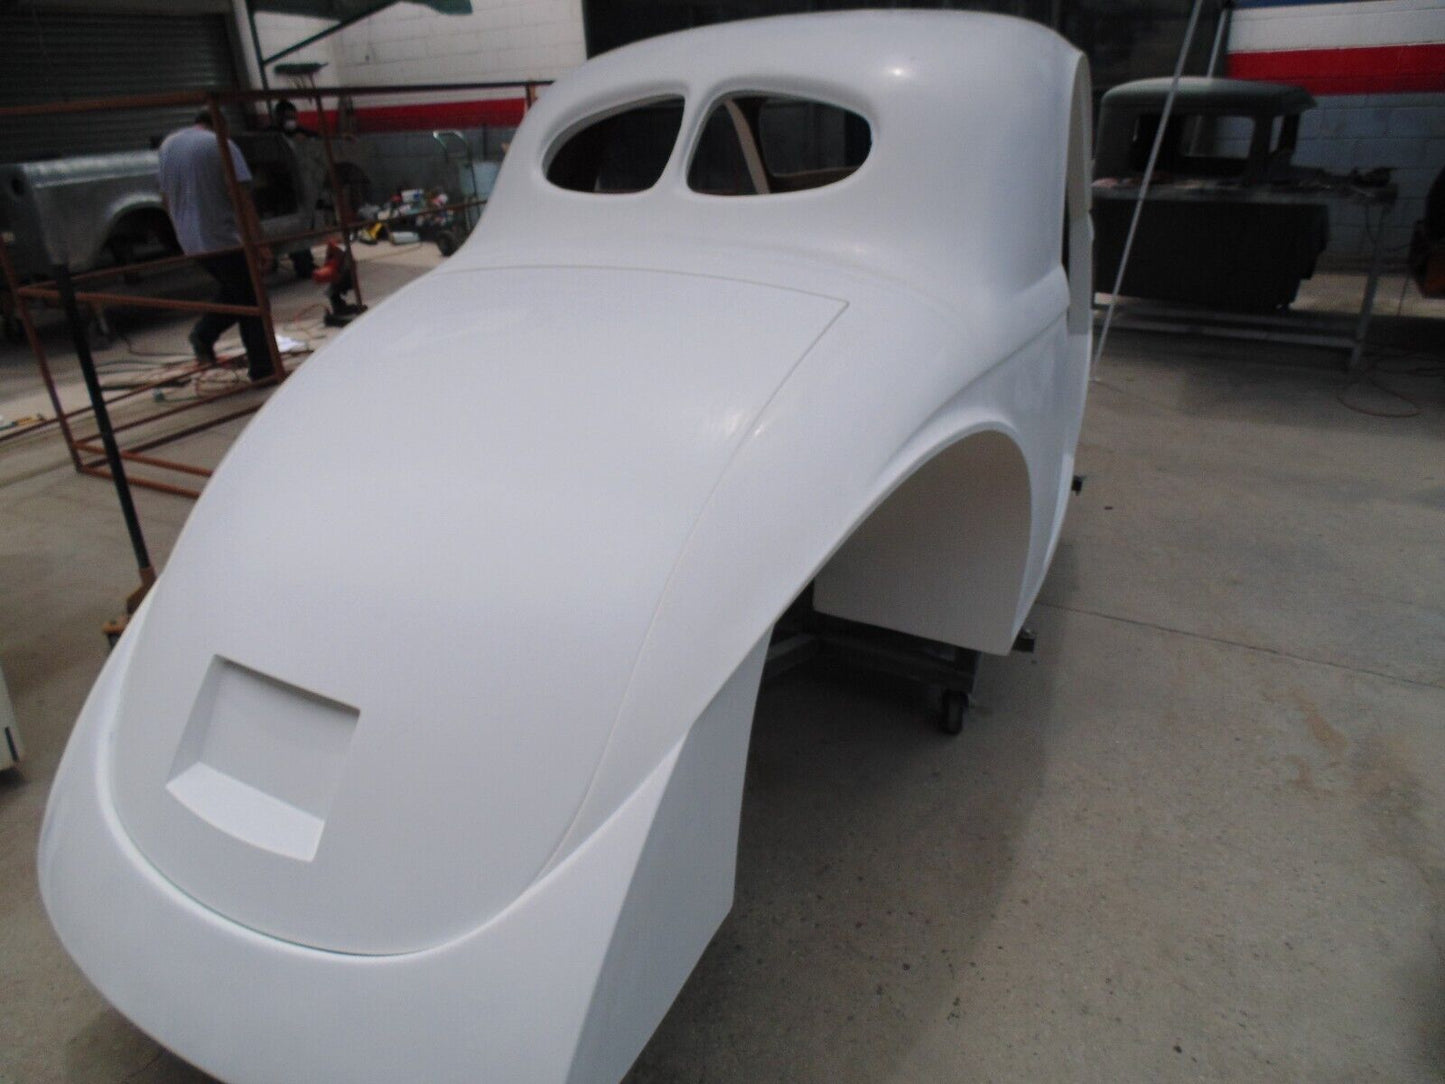 1941 - Willys Coupe fiberglass body kit, ready for you to build your own toy !  Approx 1/4 thick or 4 layers of 1.5 oz fiberglass matt